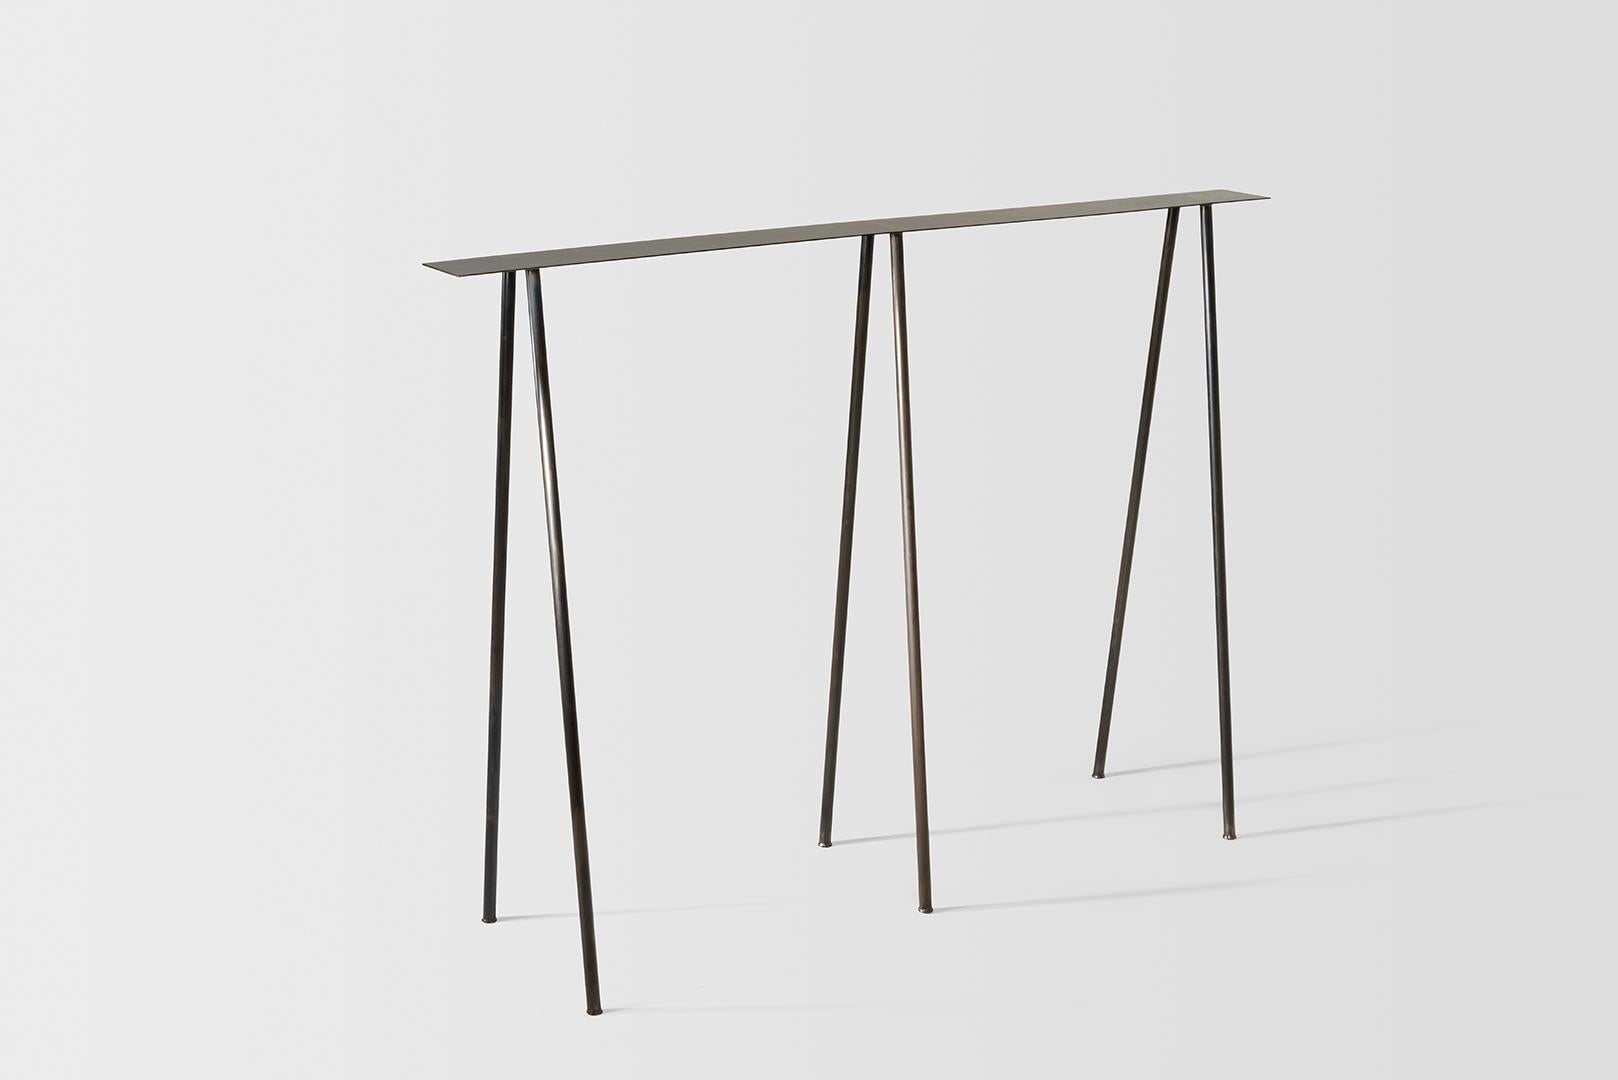 Where metal implies sturdiness, and calls for strong industrial motifs, the I/ the H, the beam / the cross, the Paper Table is a play on our own sense of balance. 

It questions the thinness of both surface and structure, in order to reach their